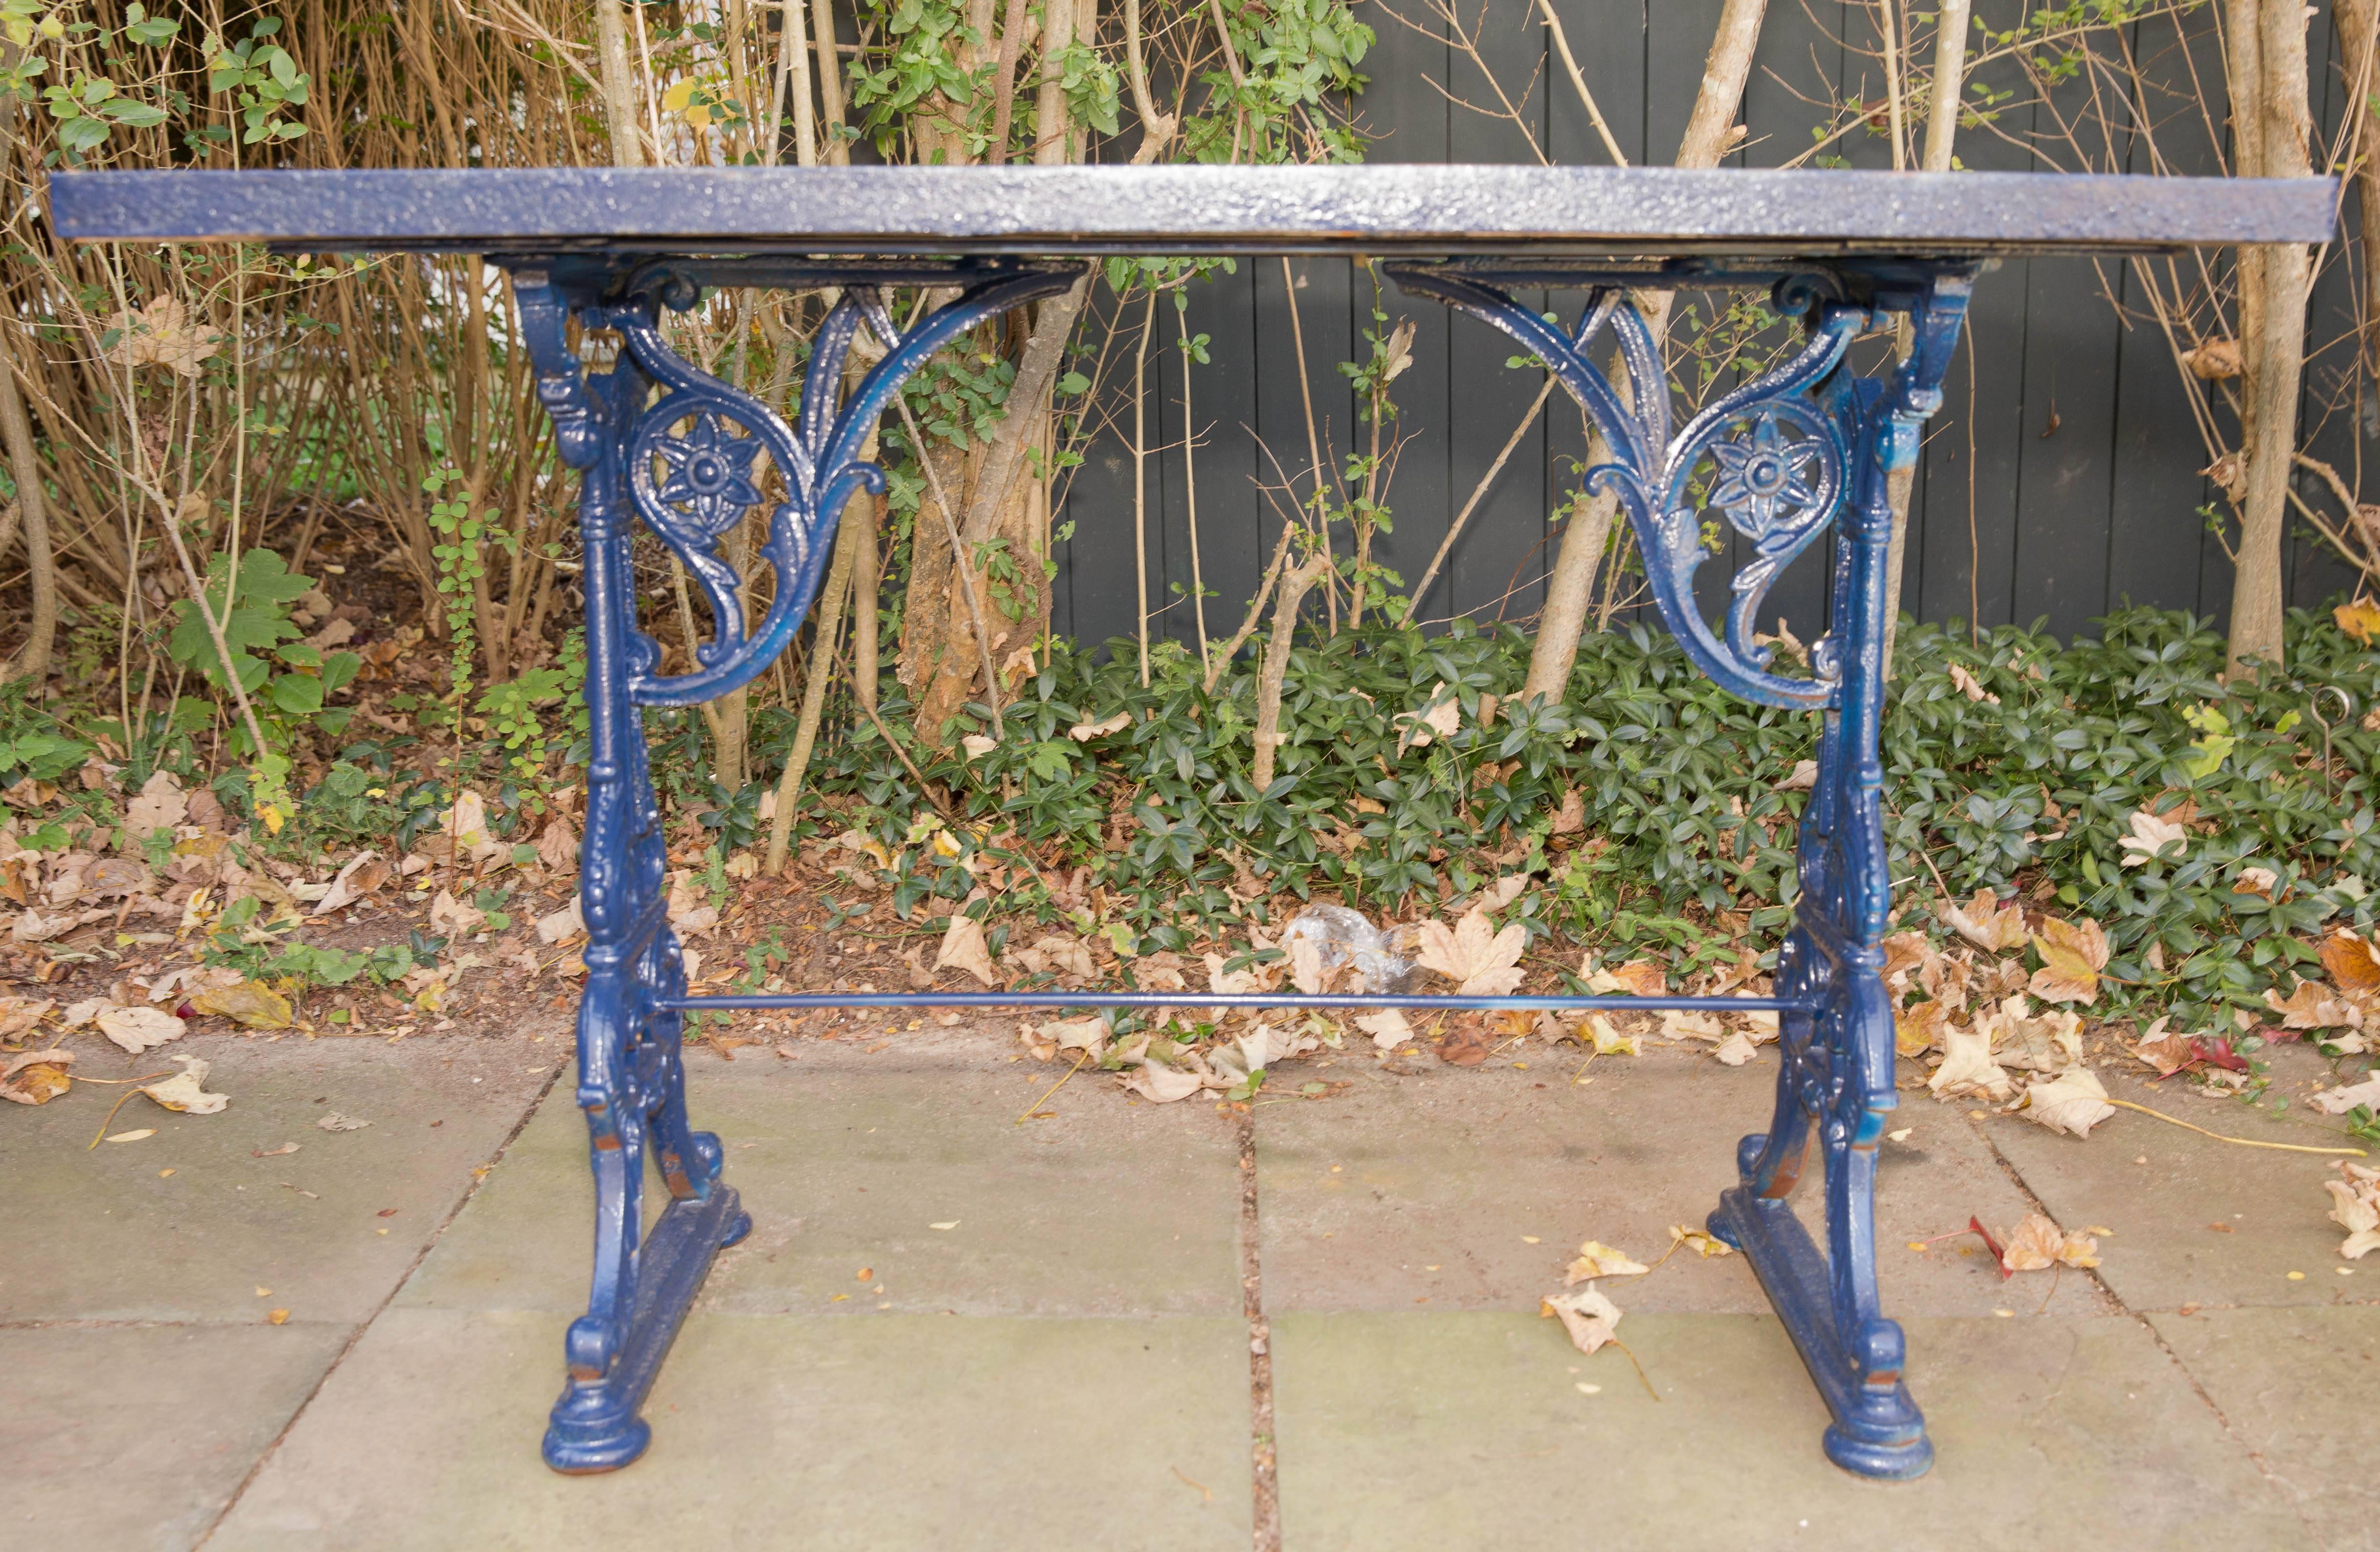 English Pair of Iron Pub Table Consoles with Blue and White Tile Tops / Aesthetic Style